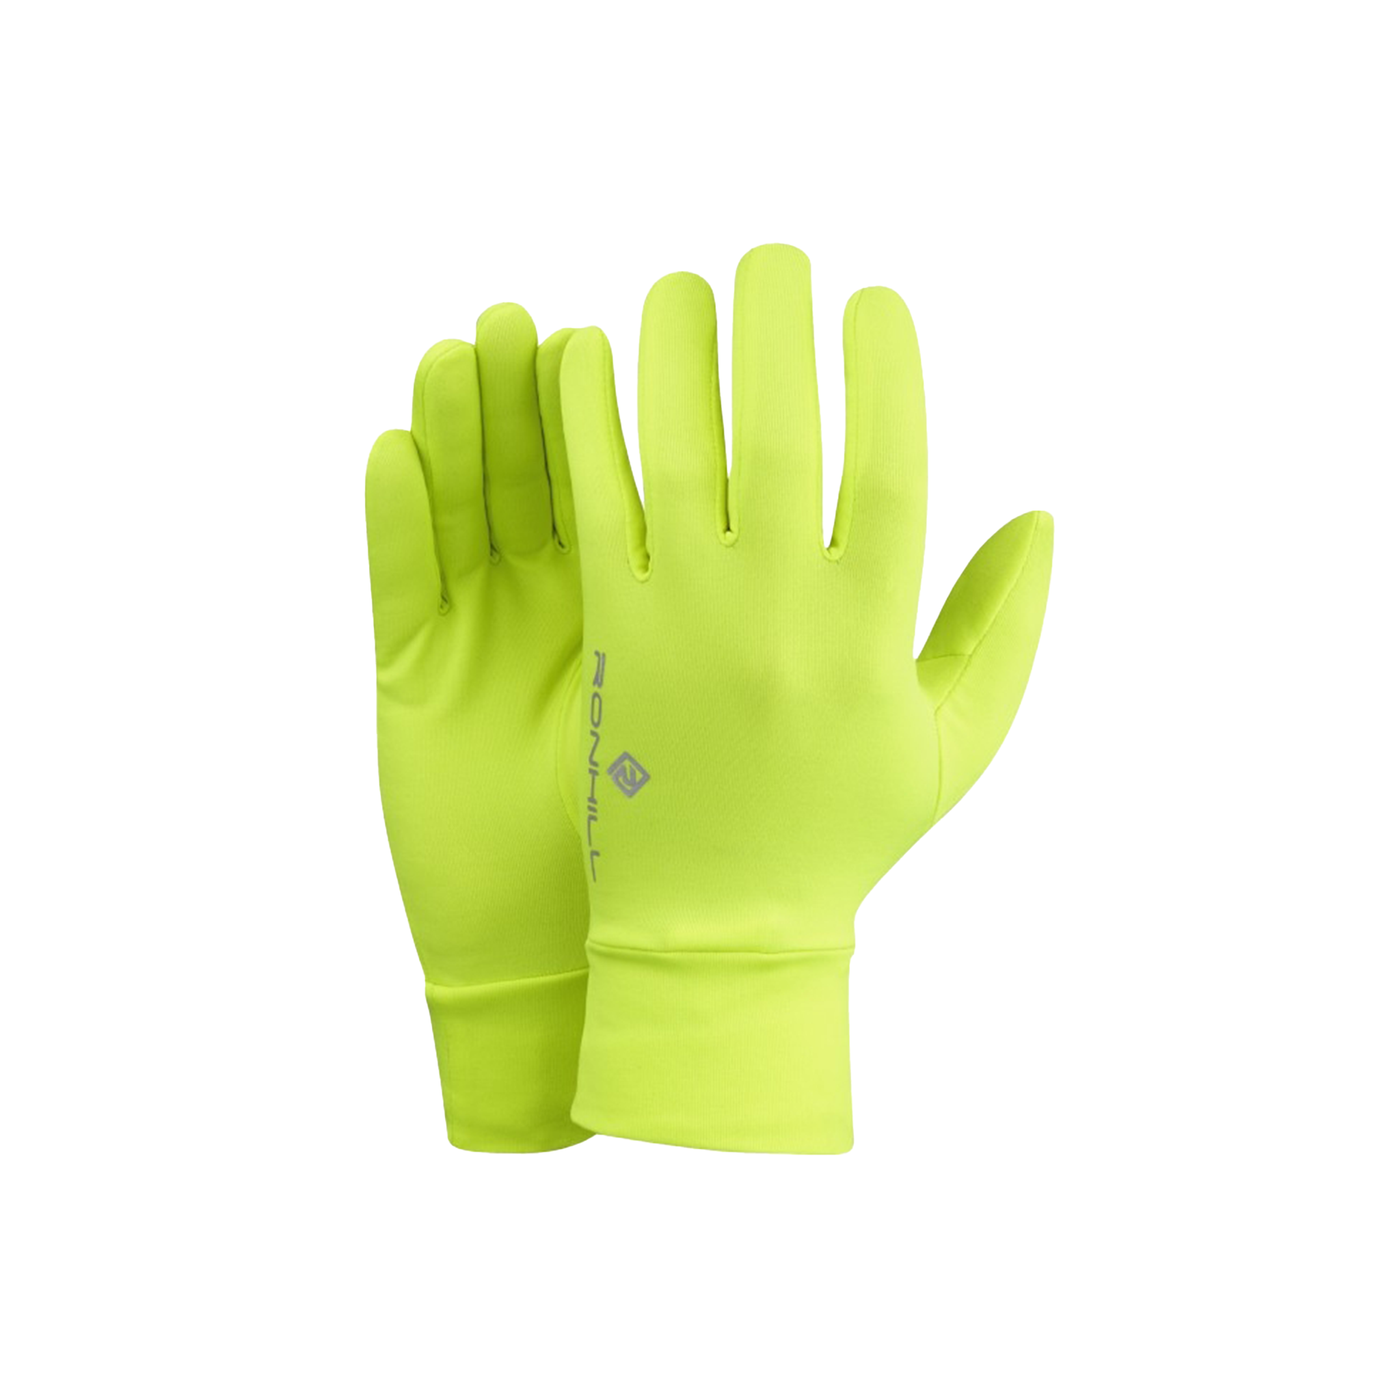 RonHill Classic Glove - Fluo Yellow